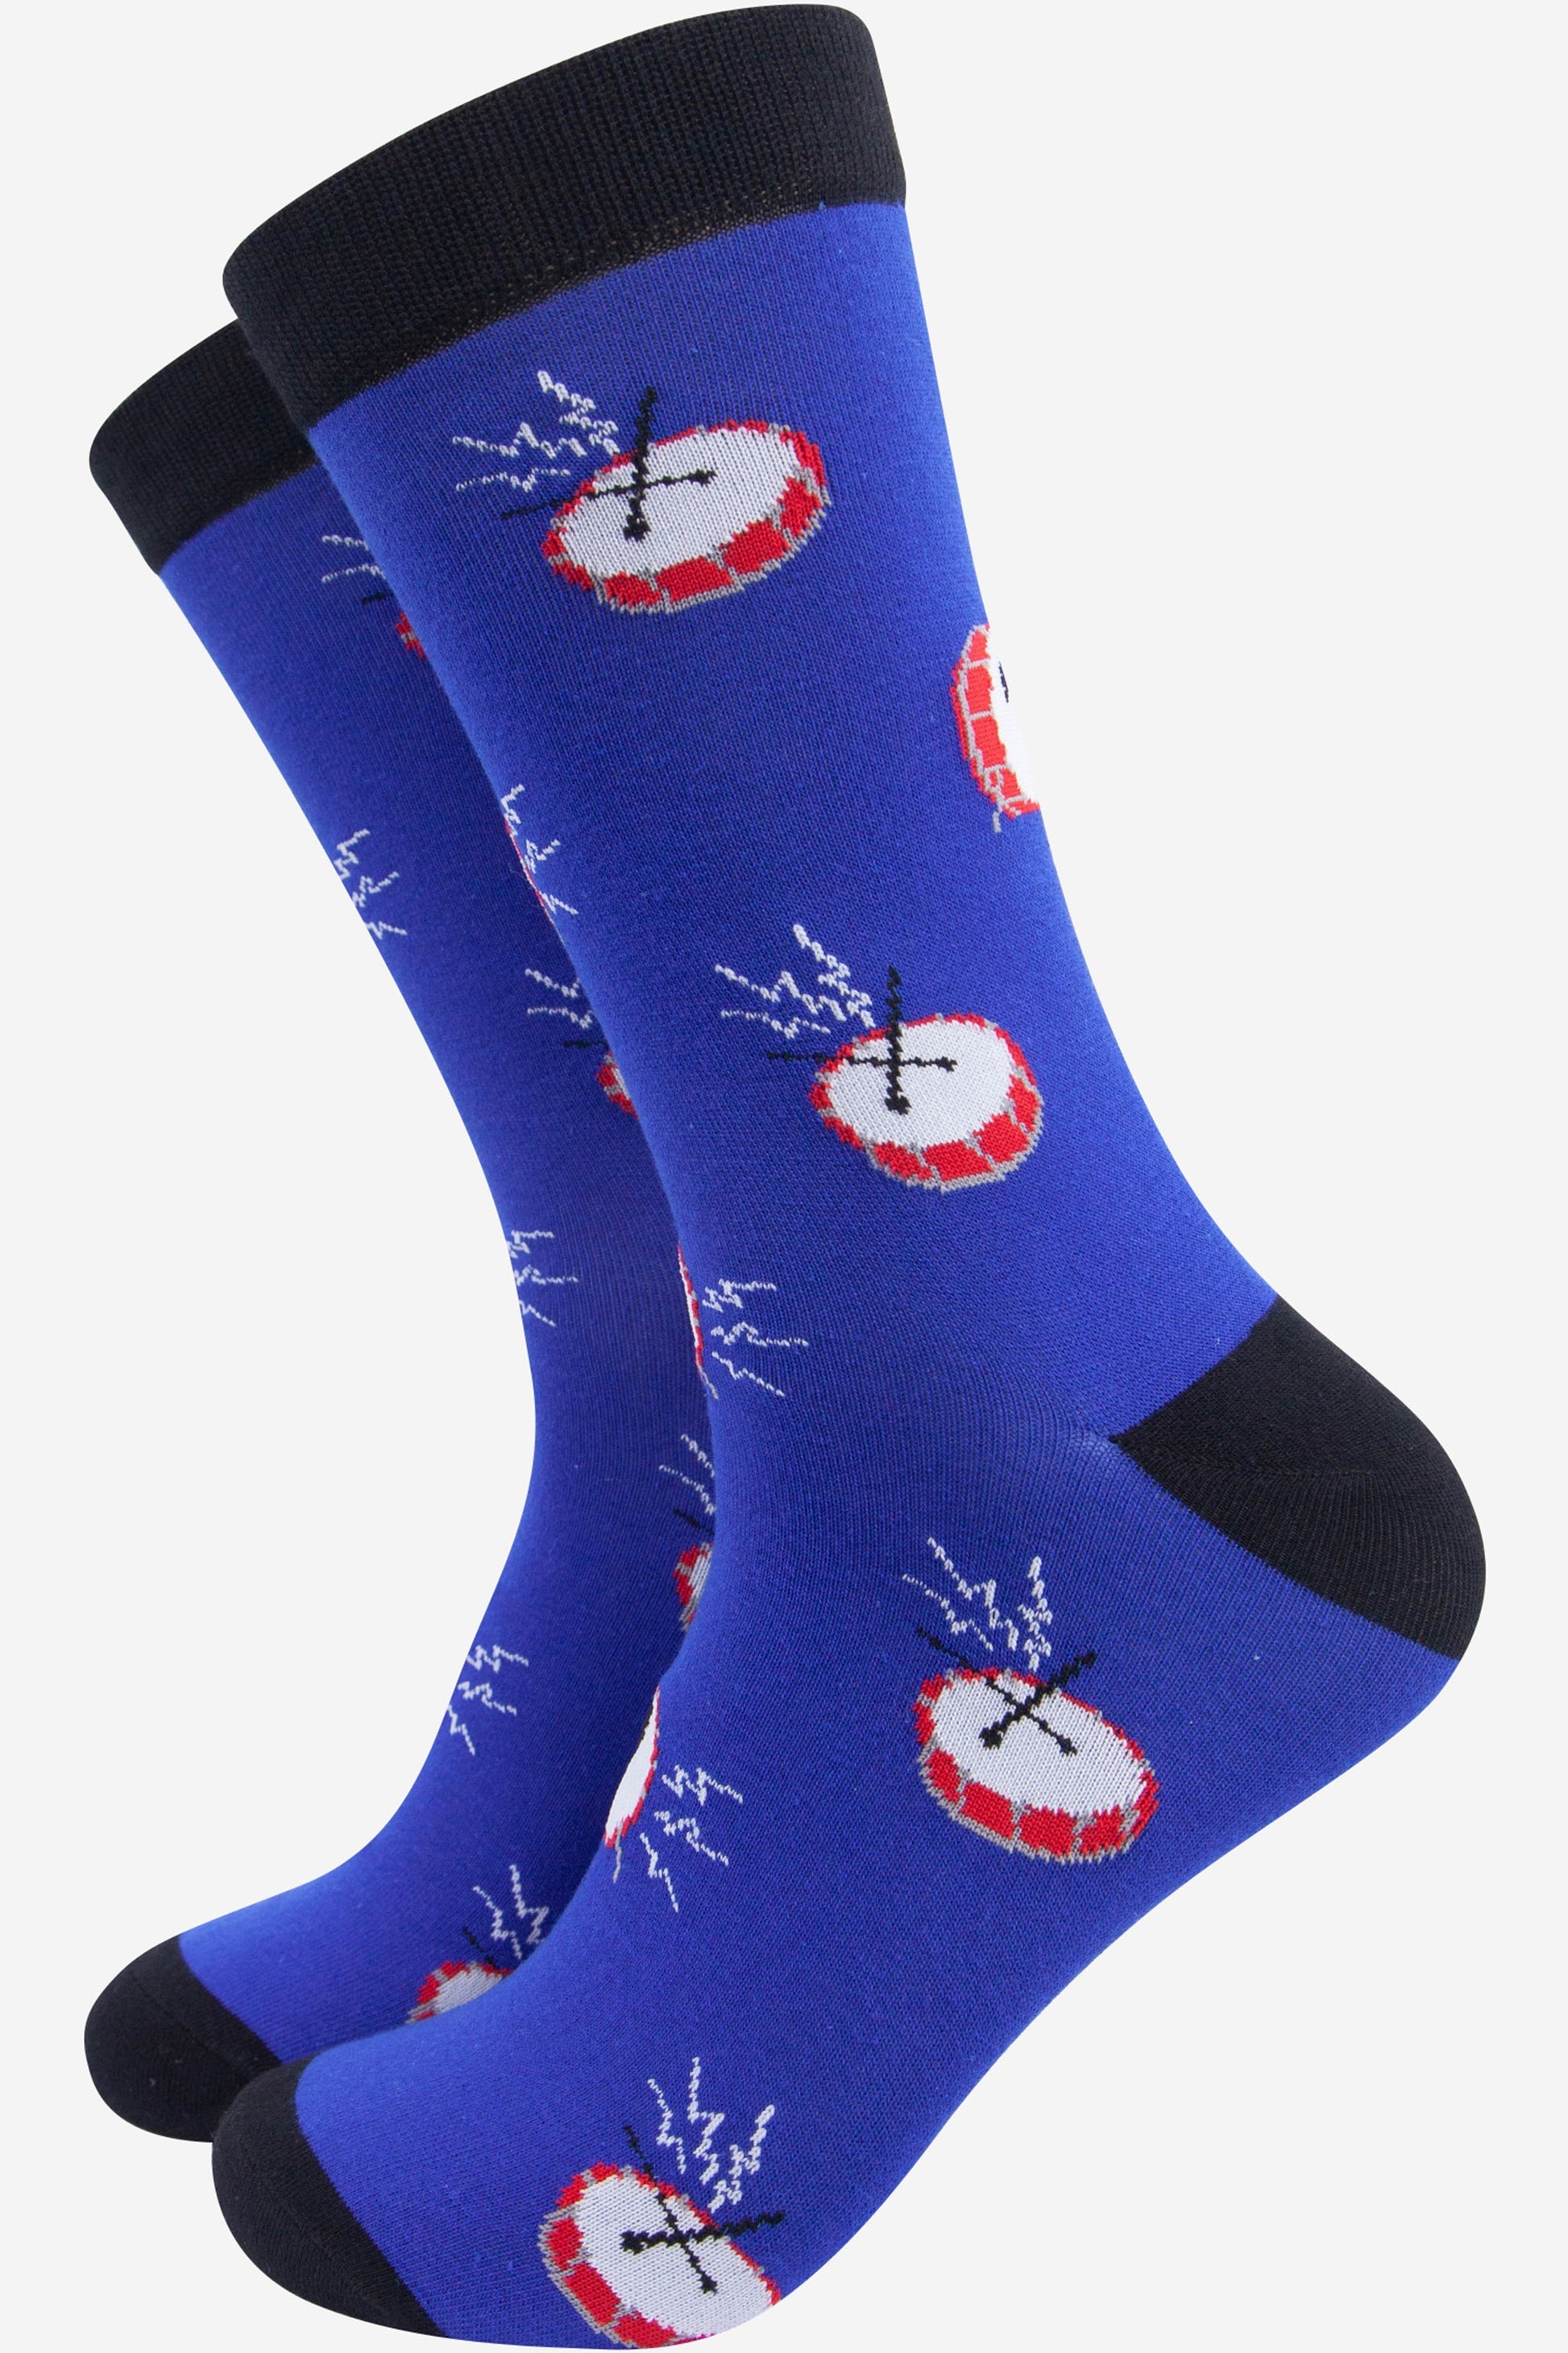 blue and black mens bamboo socks featuring an all over pattern of musical drums